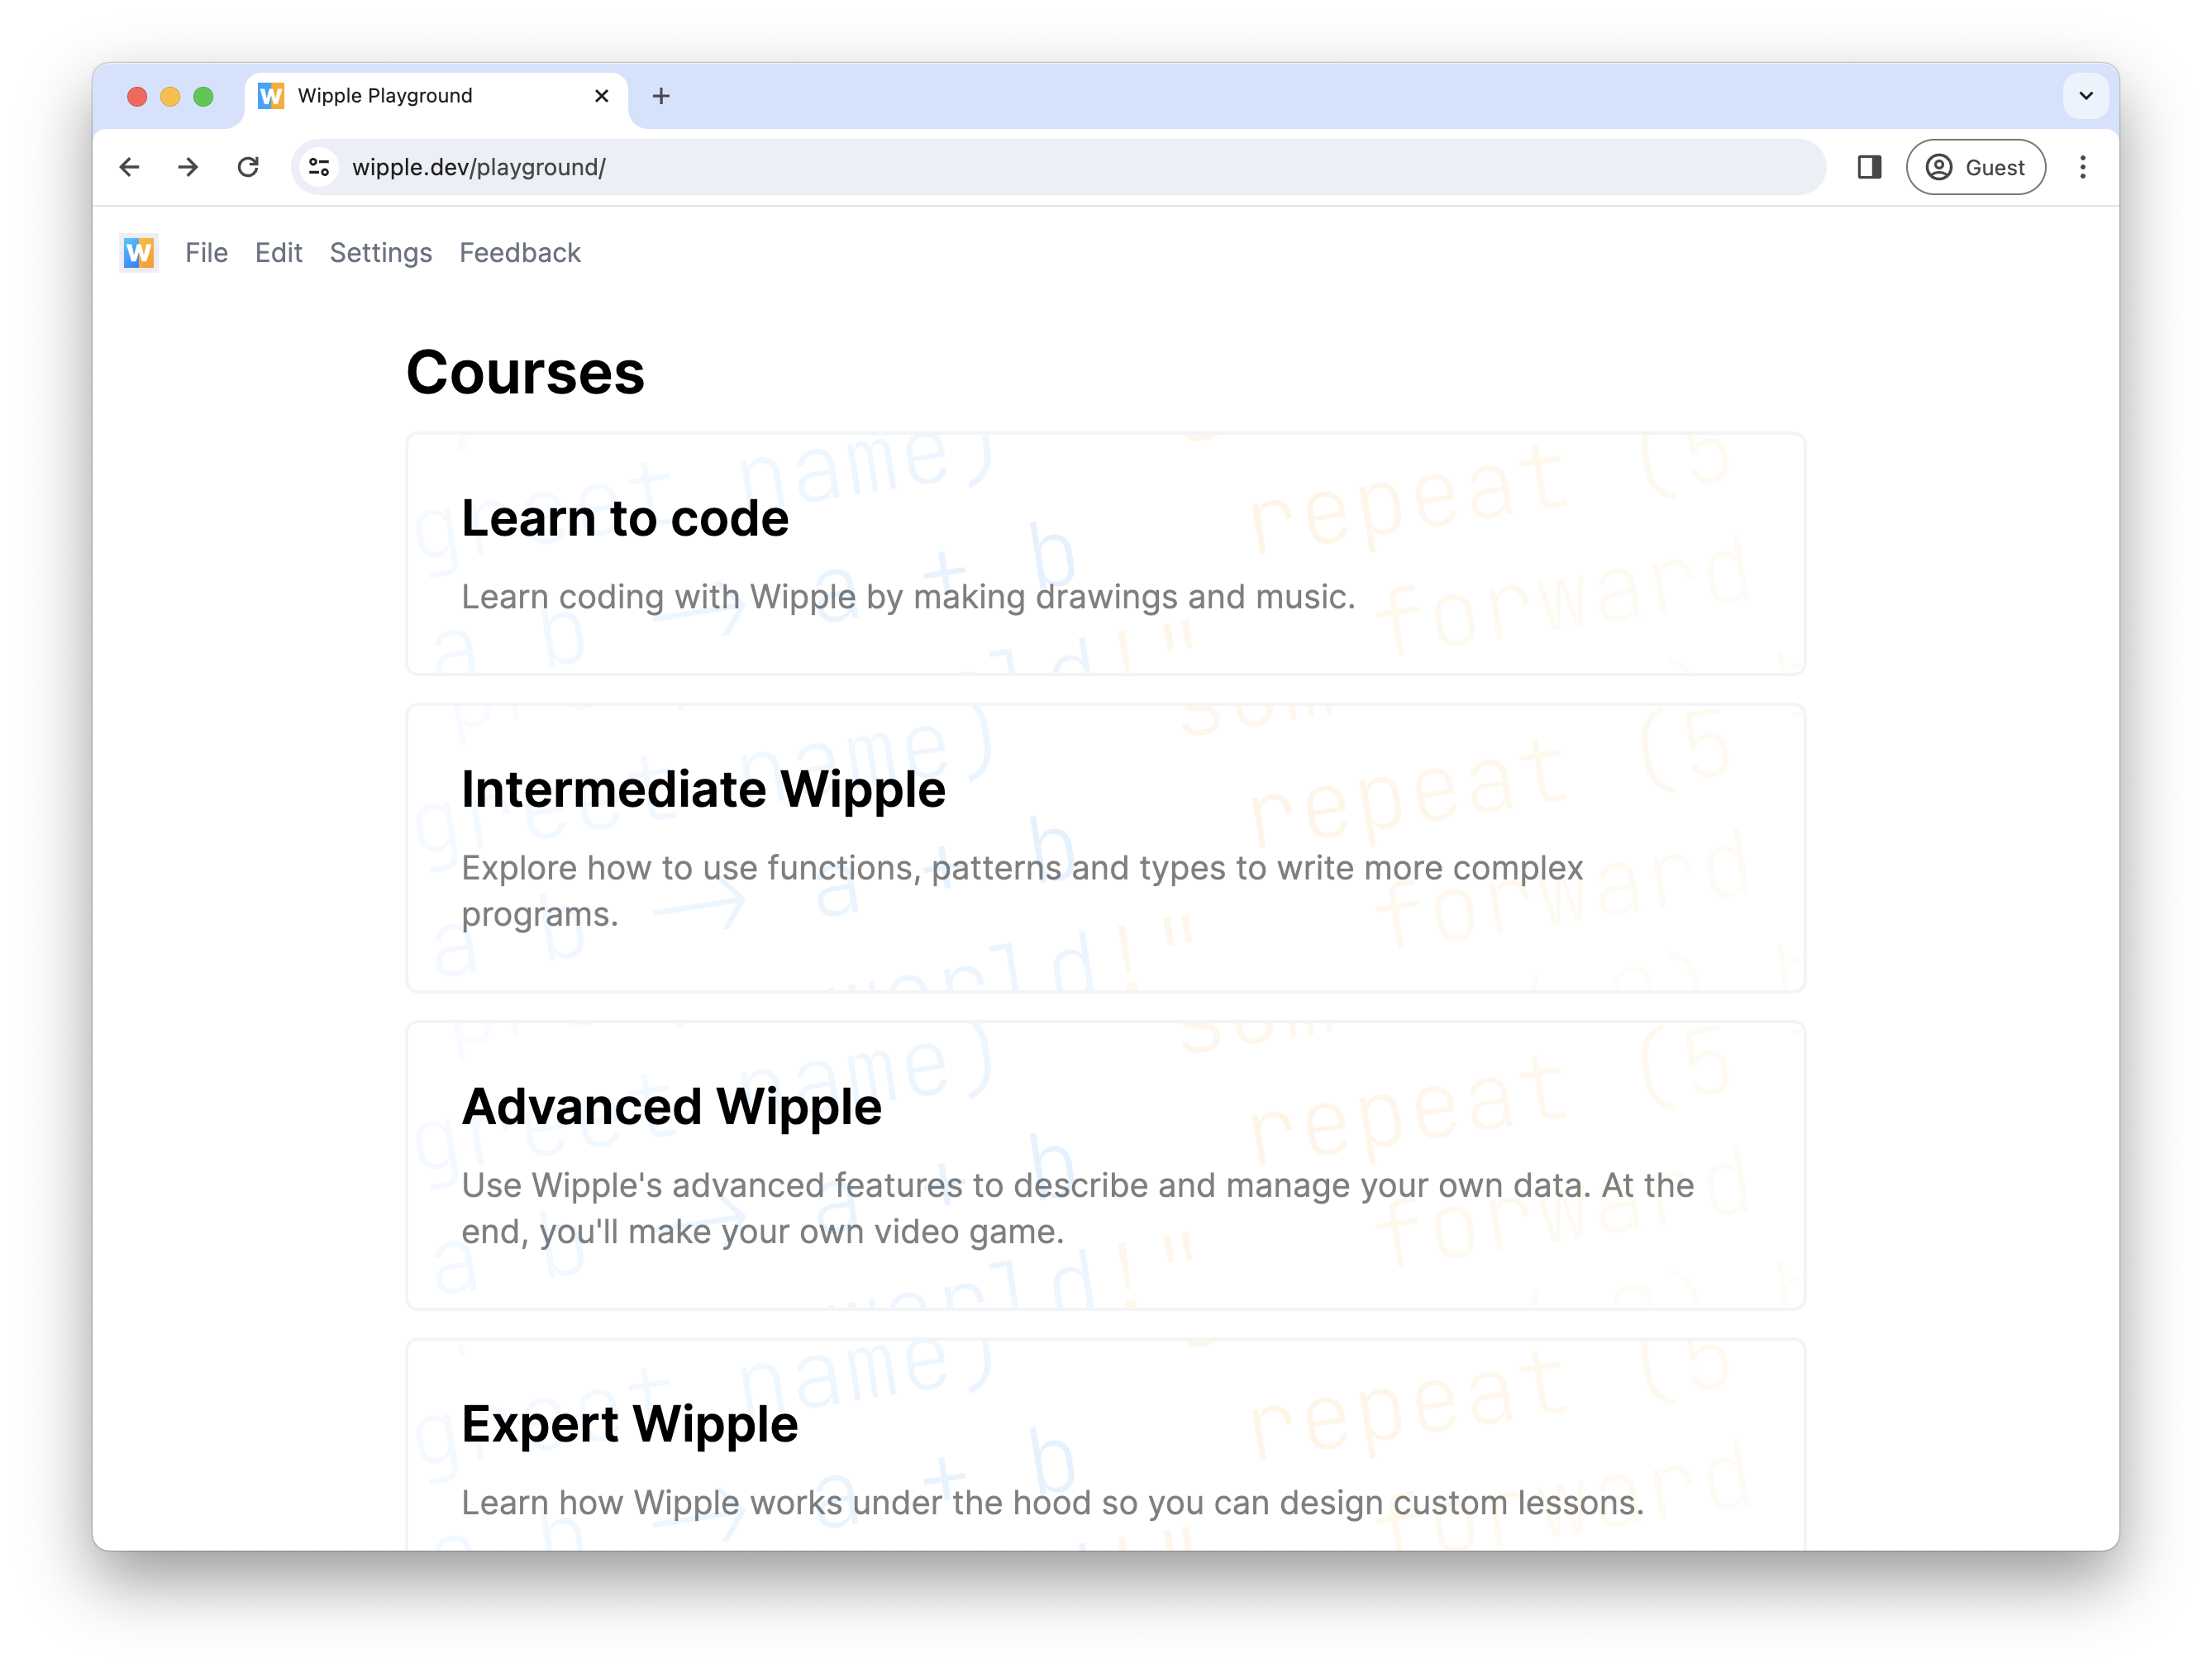 Screenshot showing the new course list in the Wipple Playground